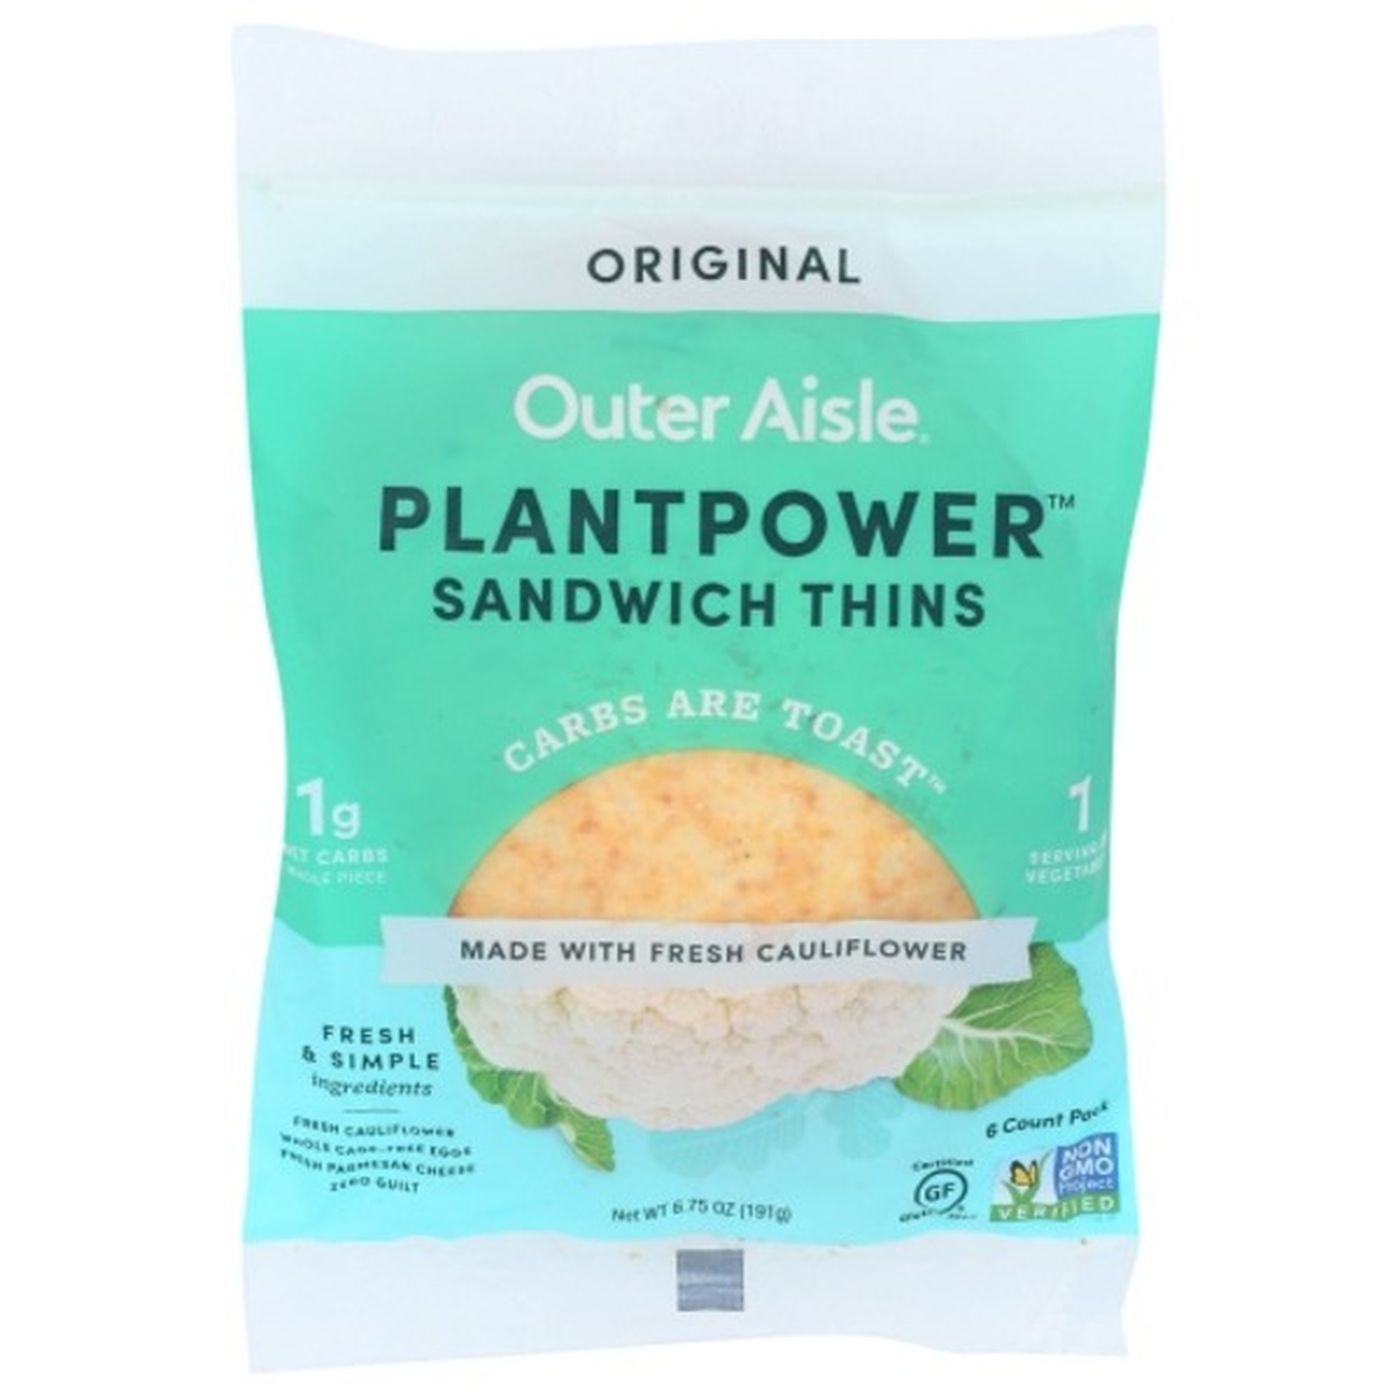 Outer Aisle Sandwich Thins Cauliflower, Original (6 ct) Delivery or